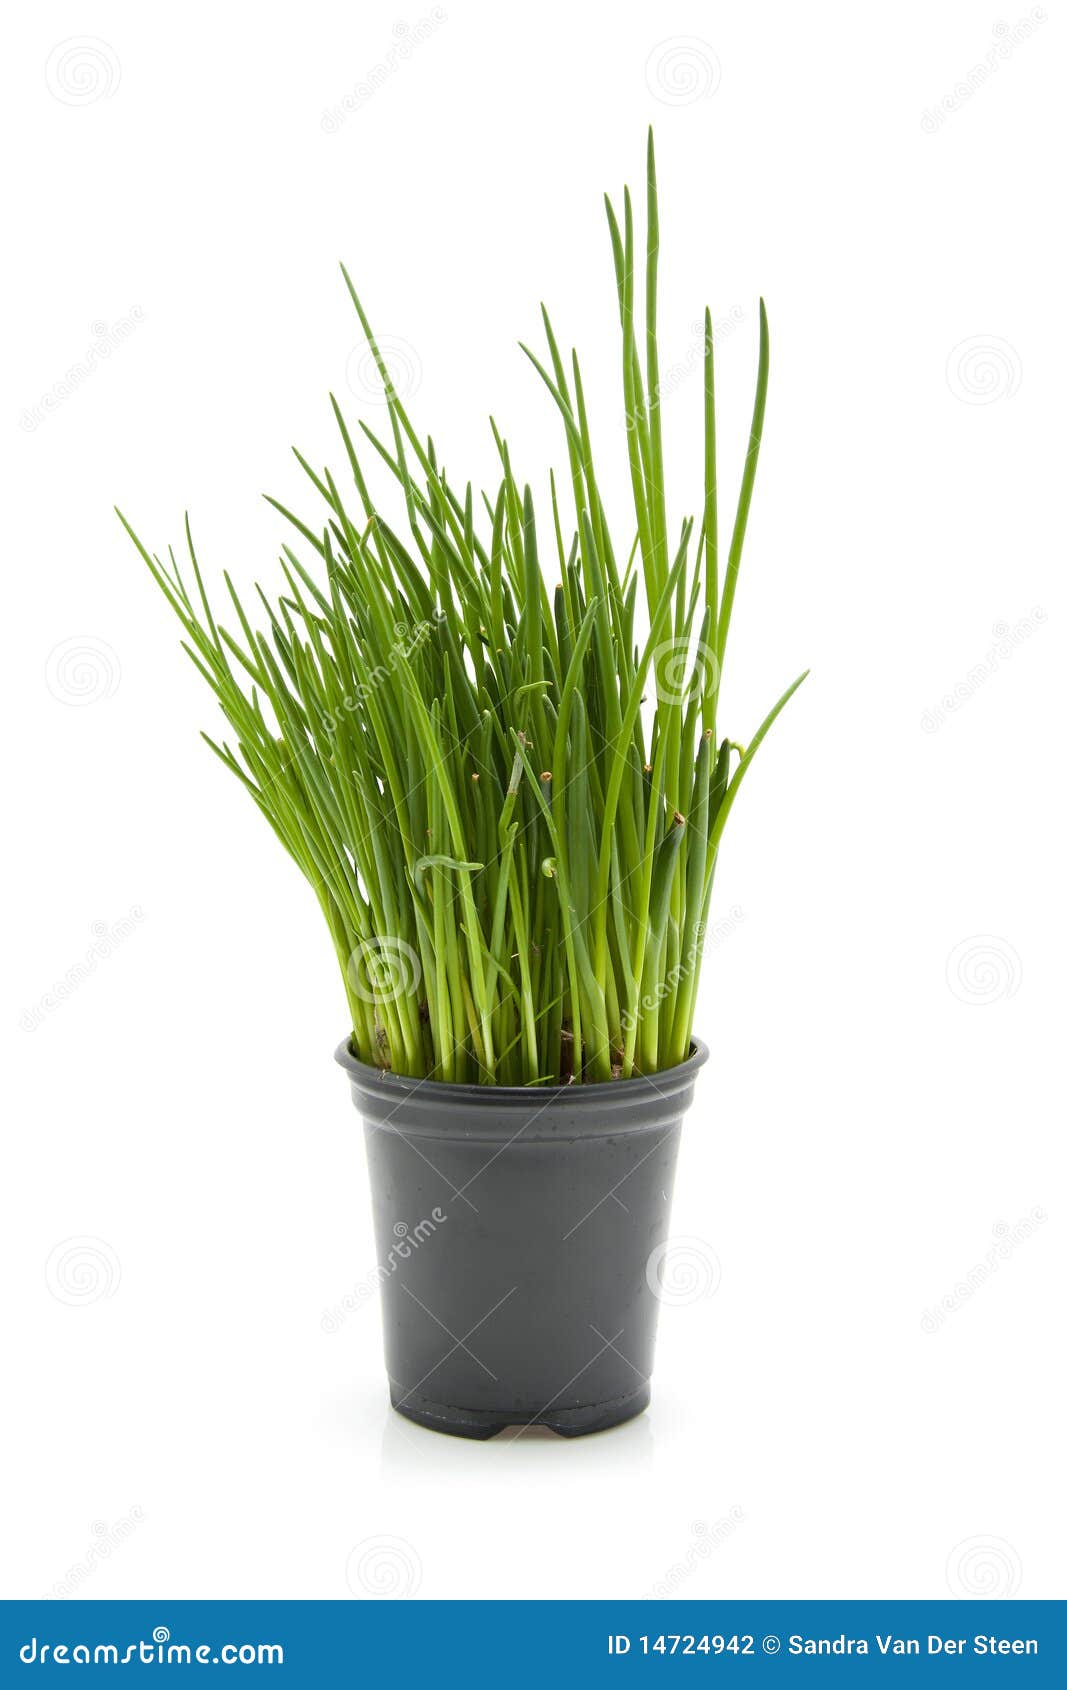 Potted chive plant care